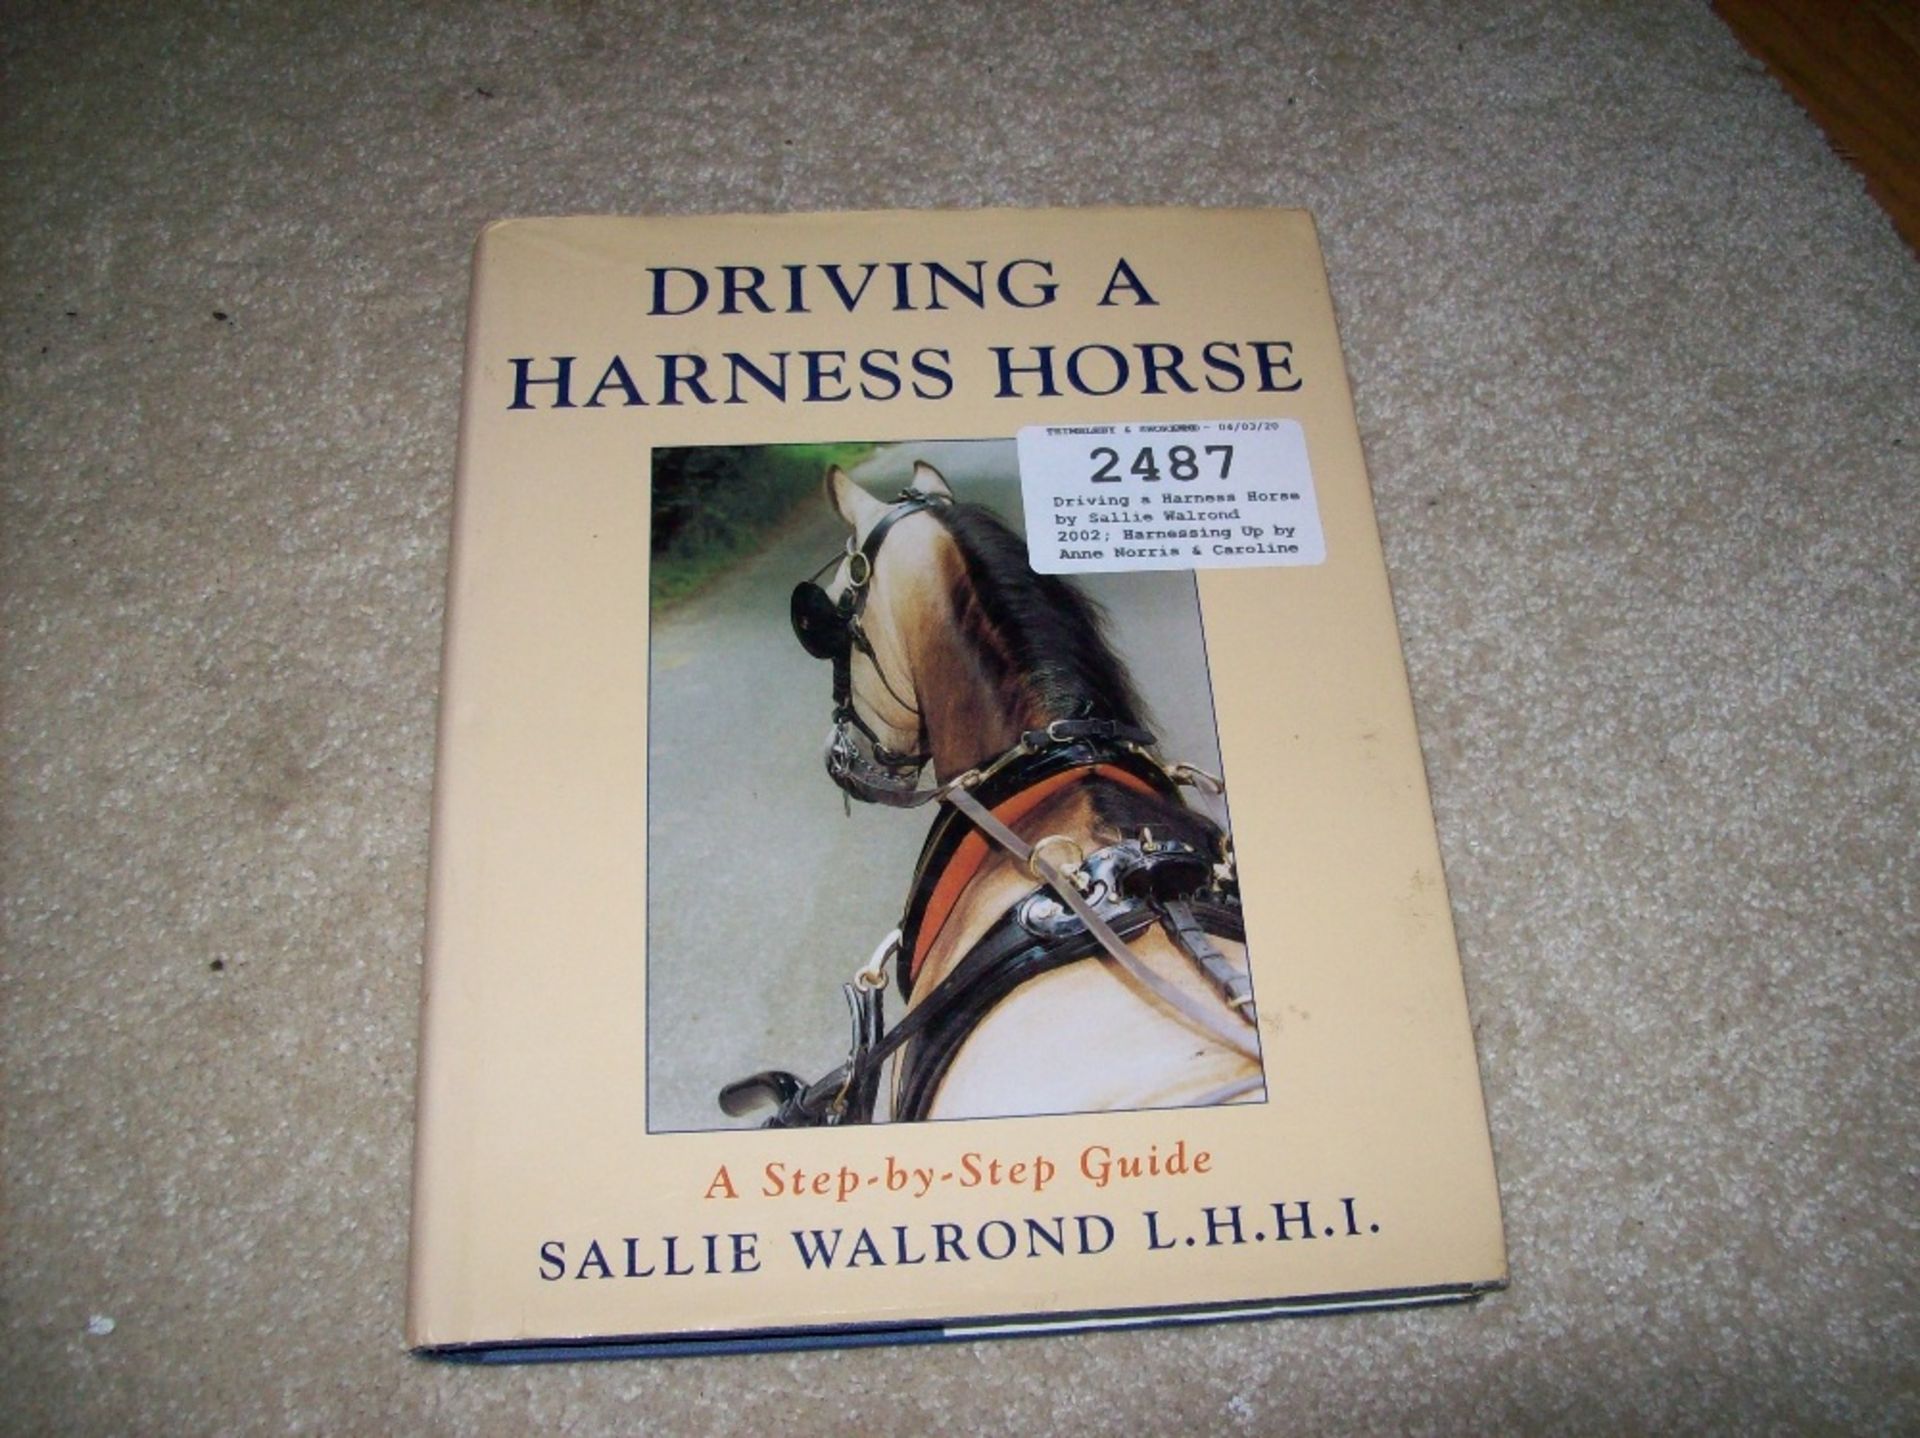 Driving a Harness Horse by Sallie Walrond, 2002; Harnessing Up by Anne Norris & Caroline Douglas,